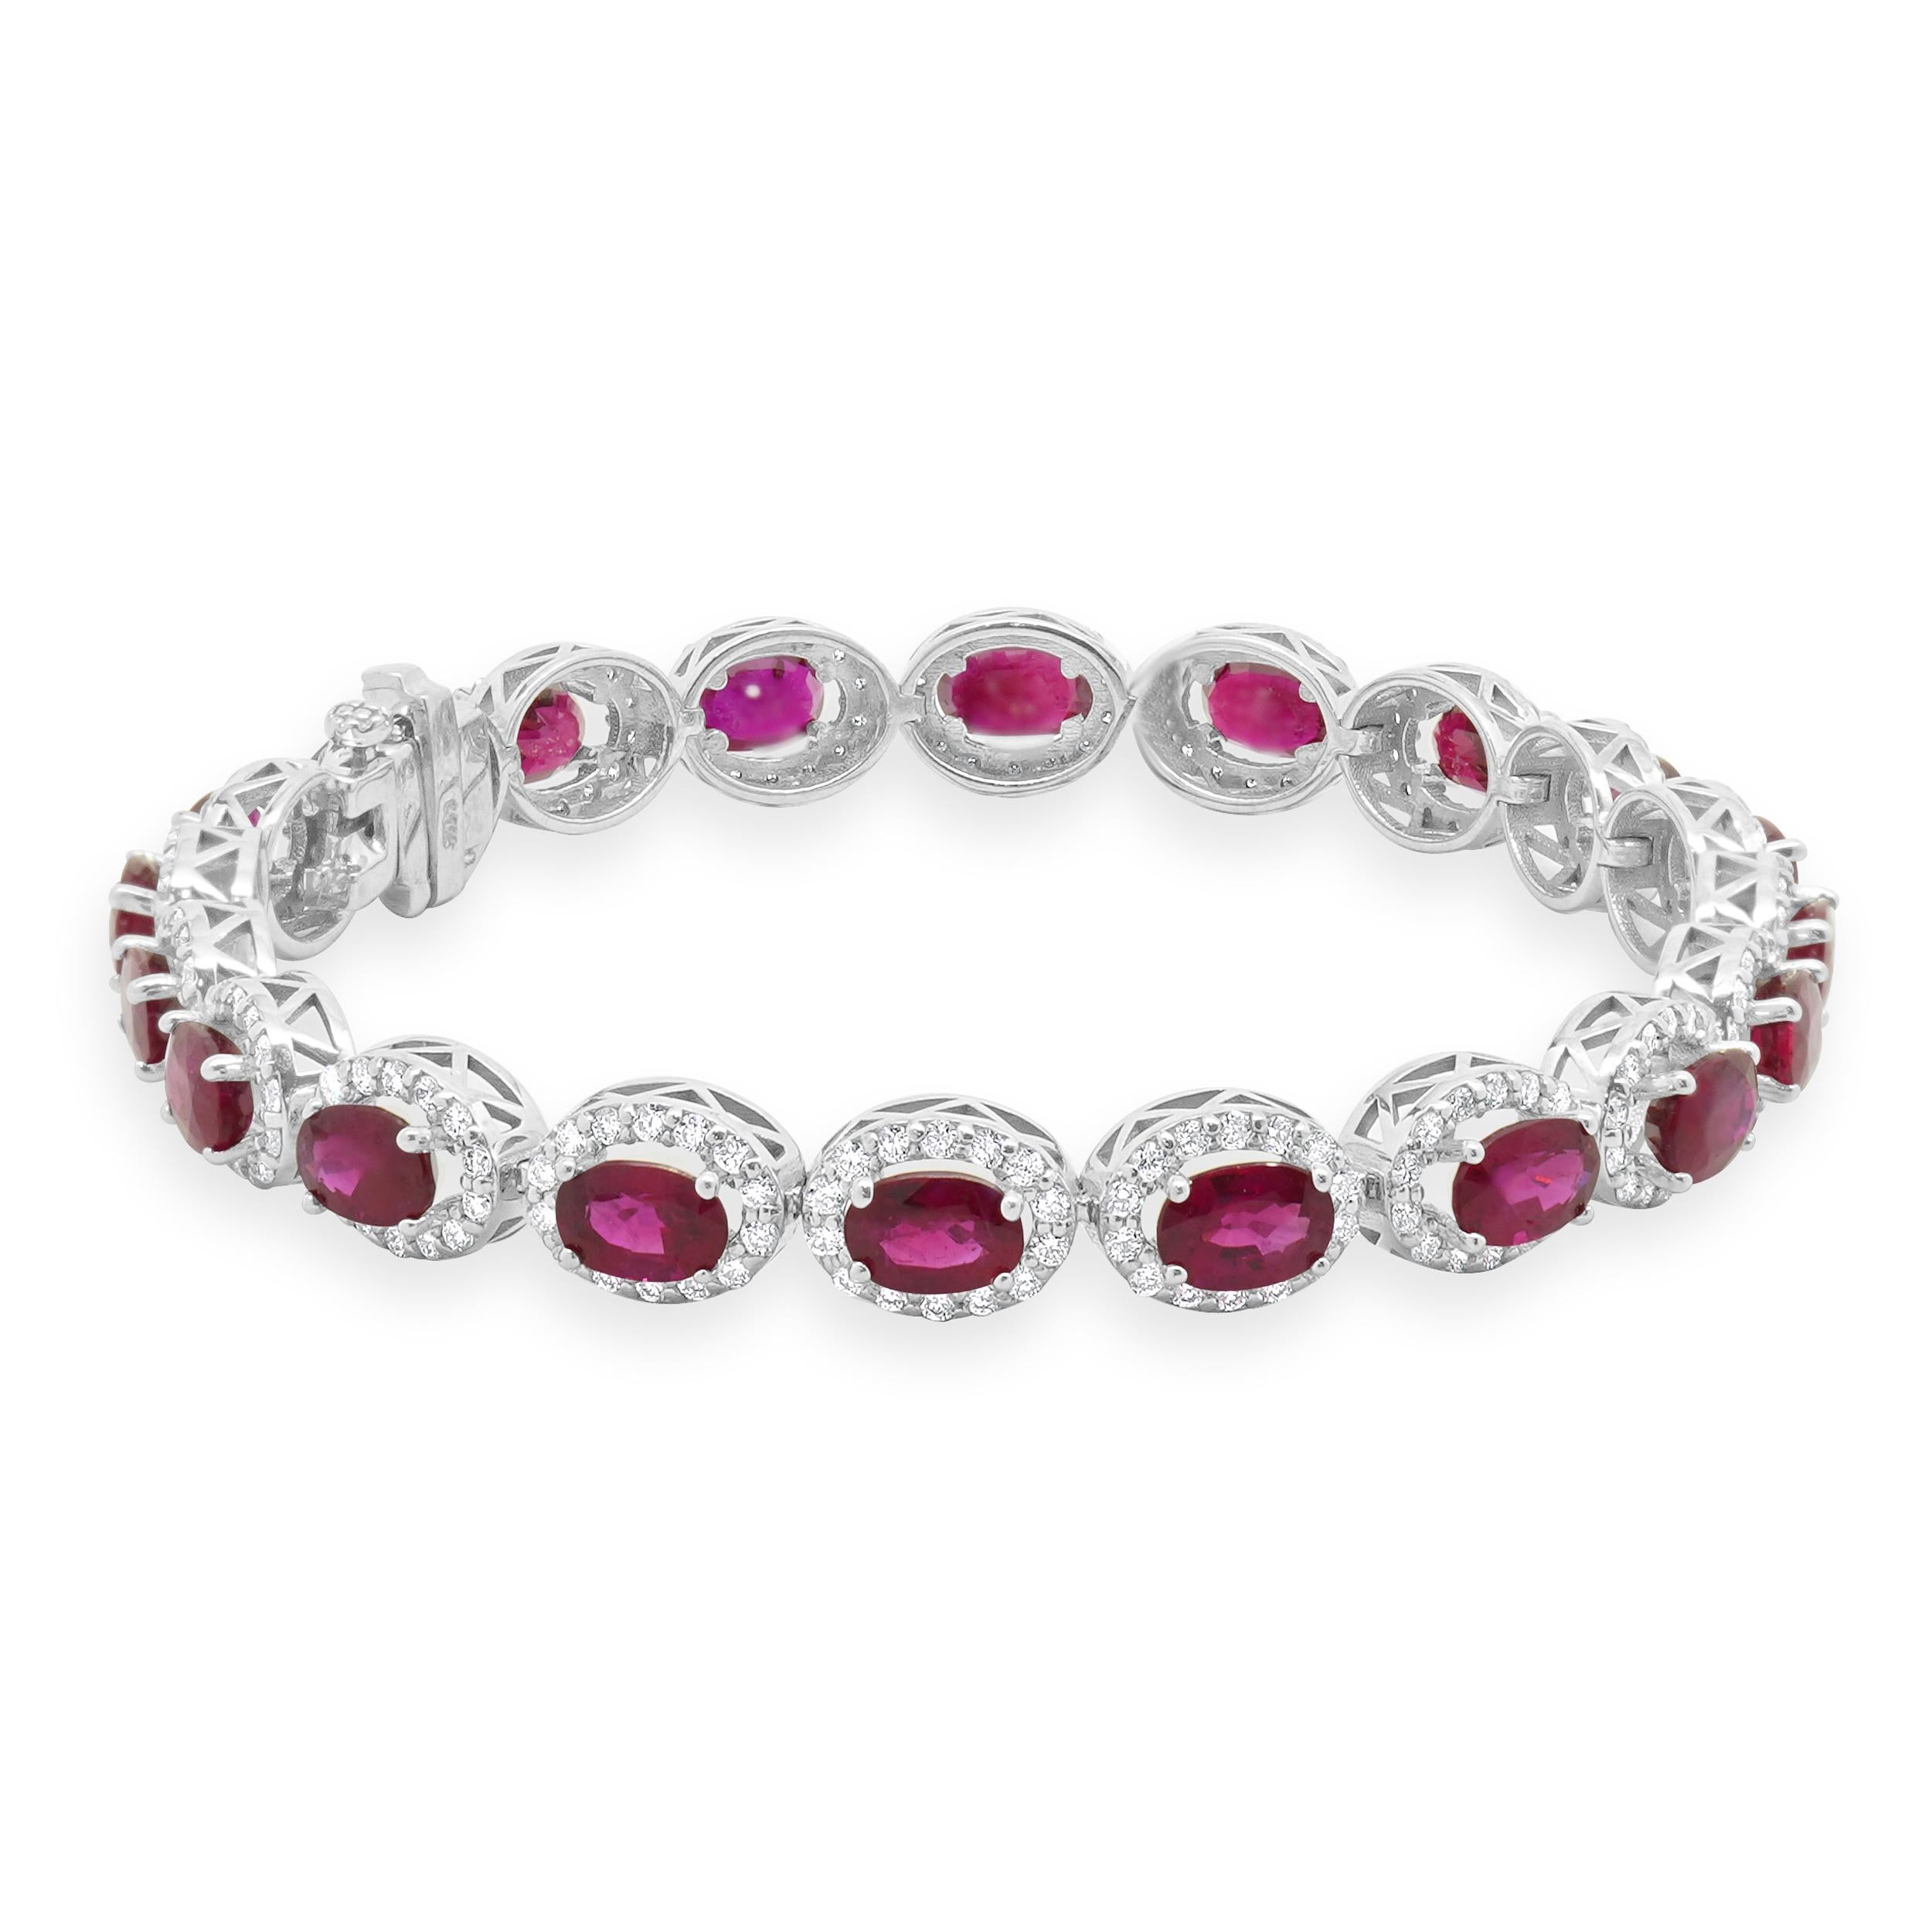 Designer: custom
Material: 14K white gold
Diamond: 260 round brilliant cut = 2.38cttw
Color: G
Clarity: SI1
Ruby: 20 oval cut = 11.44cttw
Weight: 14.94 grams
Dimensions: bracelet will fit up to a 7-inch wrist
